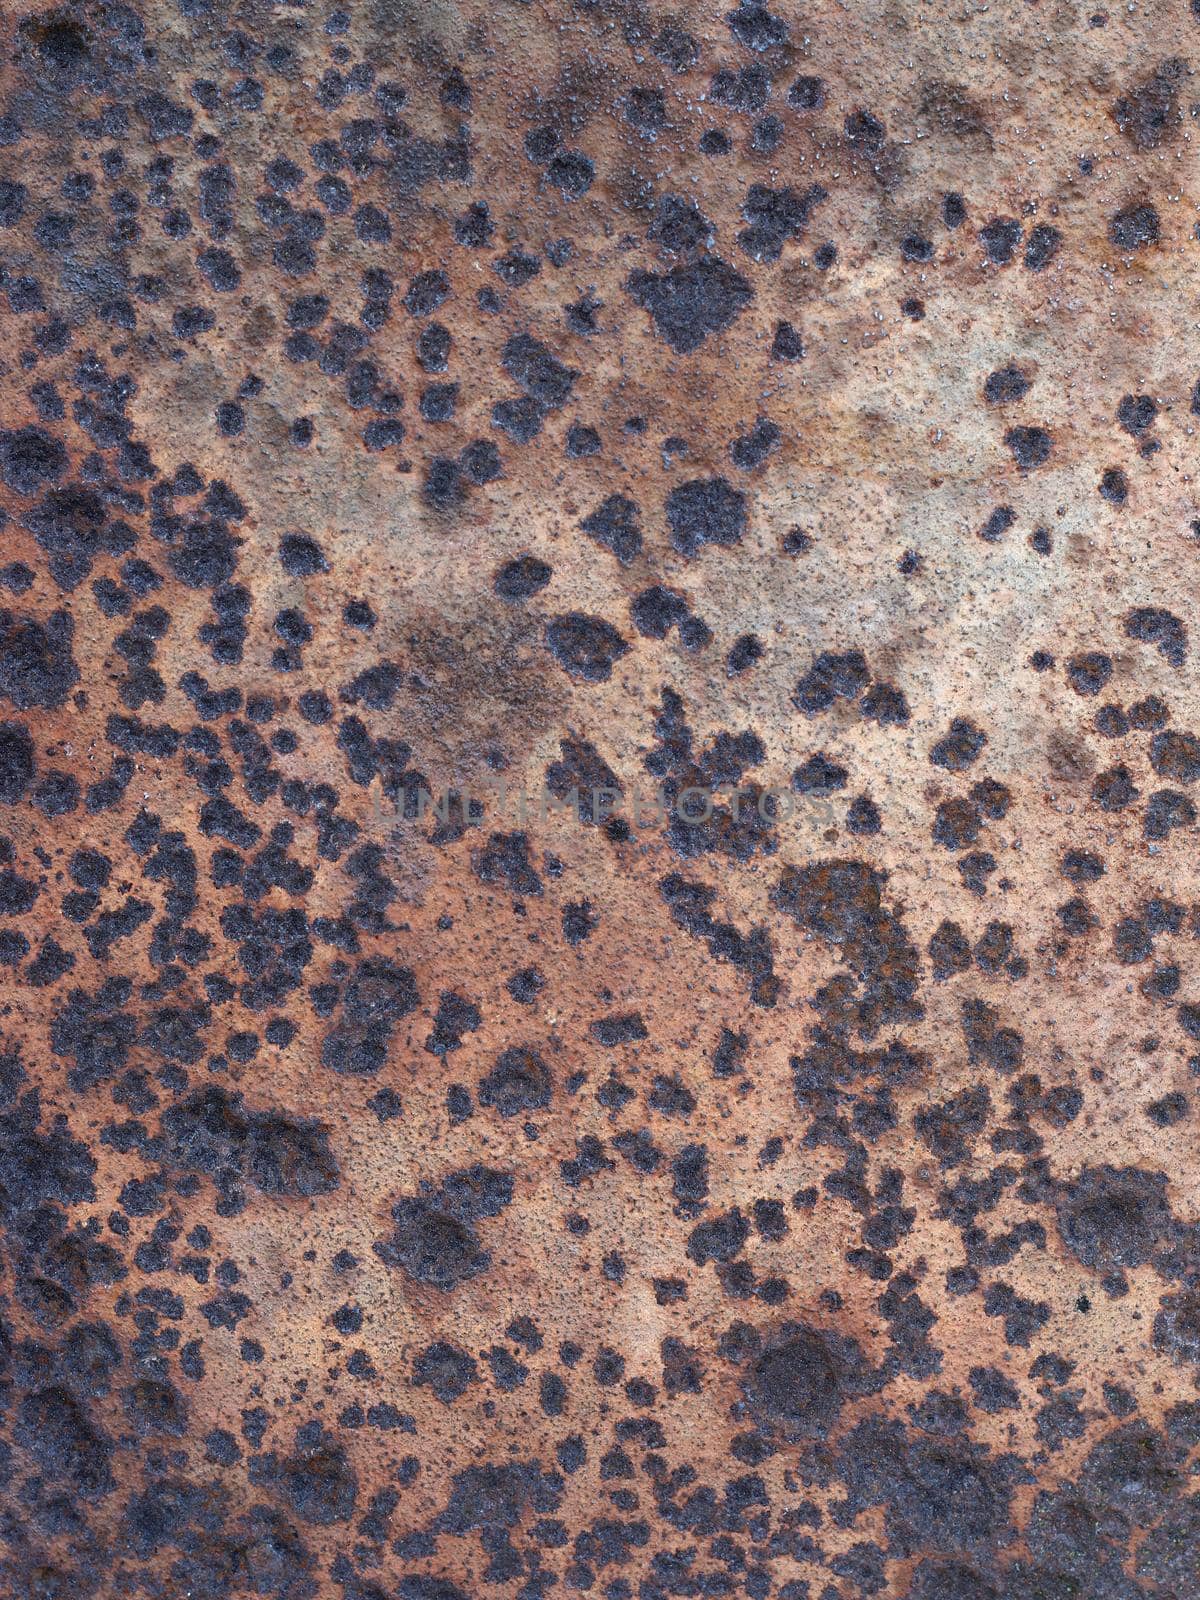 Detail of the corroded and worn surface of the iron plate